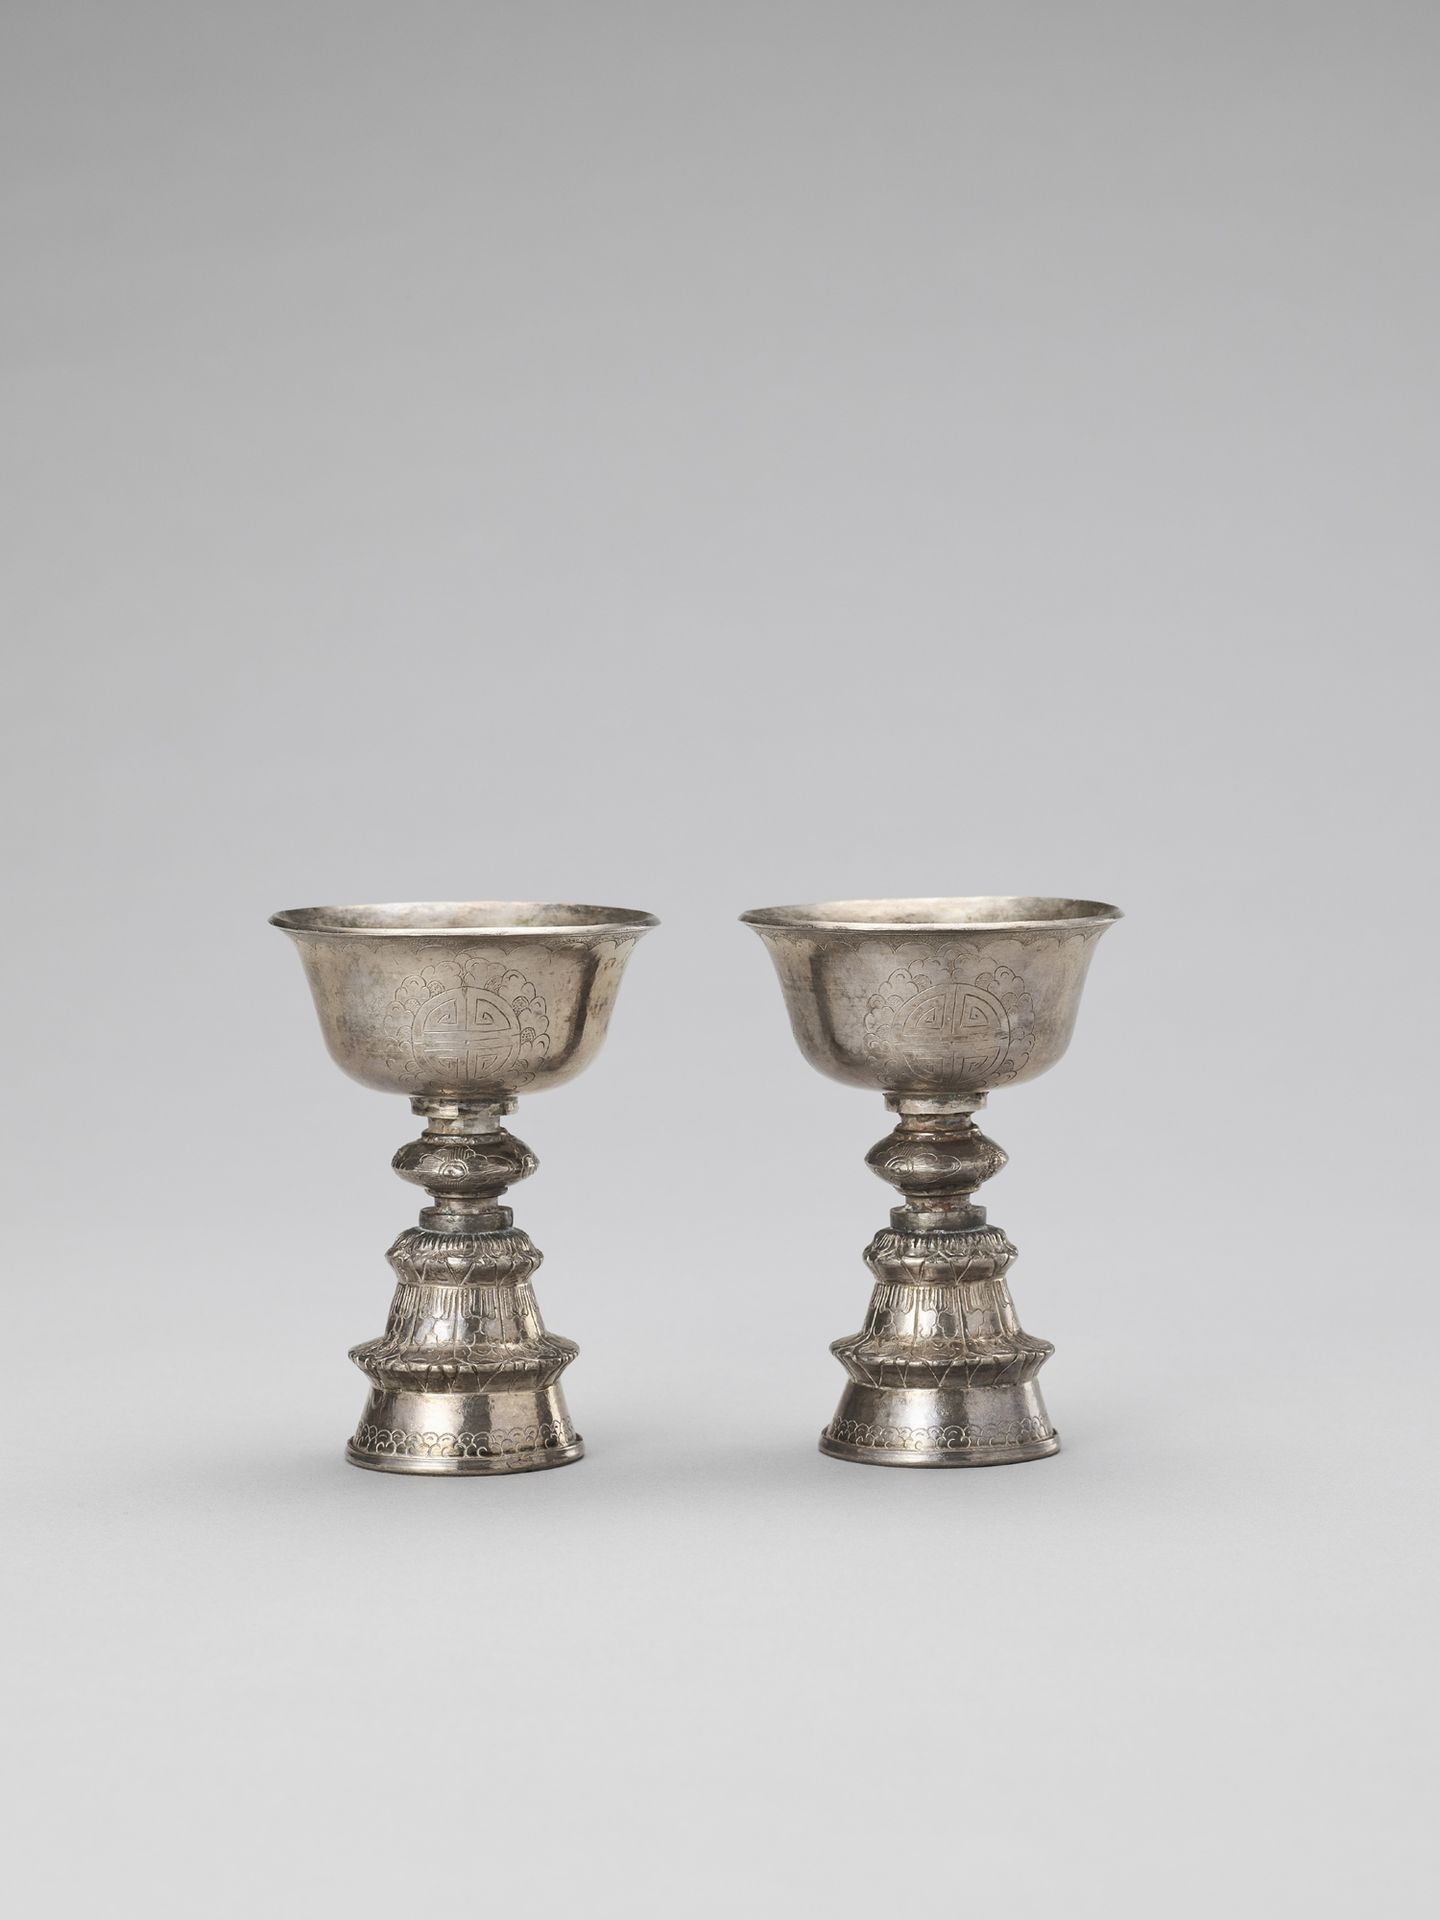 A PAIR OF SINO-TIBETAN BUTTER LAMPS, LATE 19TH CENTURY A PAIR OF SINO-TIBETAN BU&hellip;